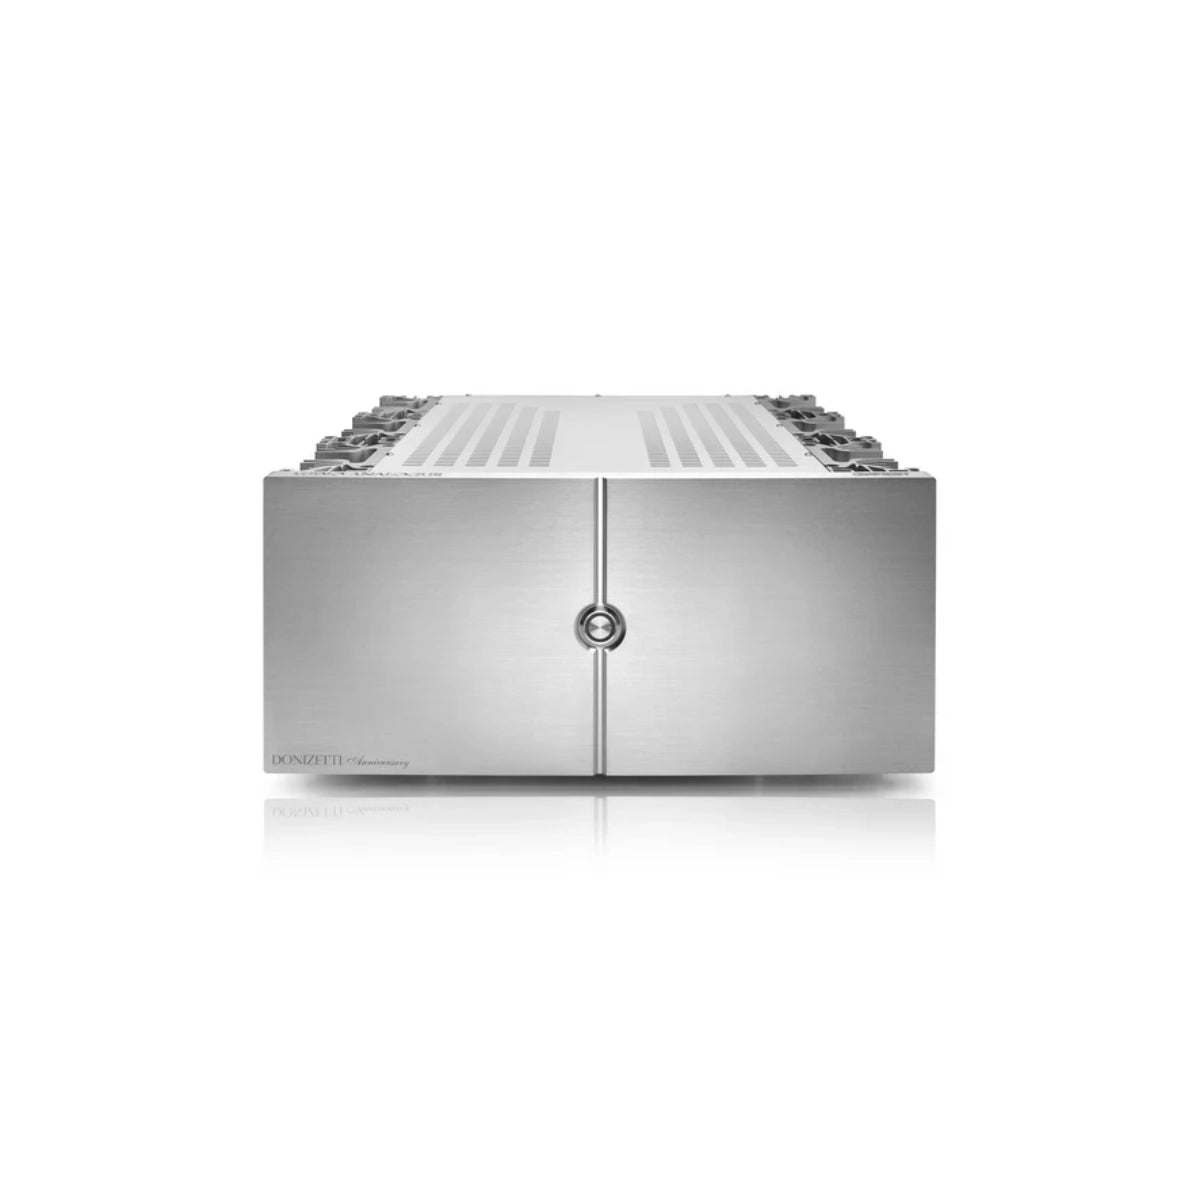 An image of Audio Analogue's Donizetti Aanniversary 250W amplifier in silver finish.